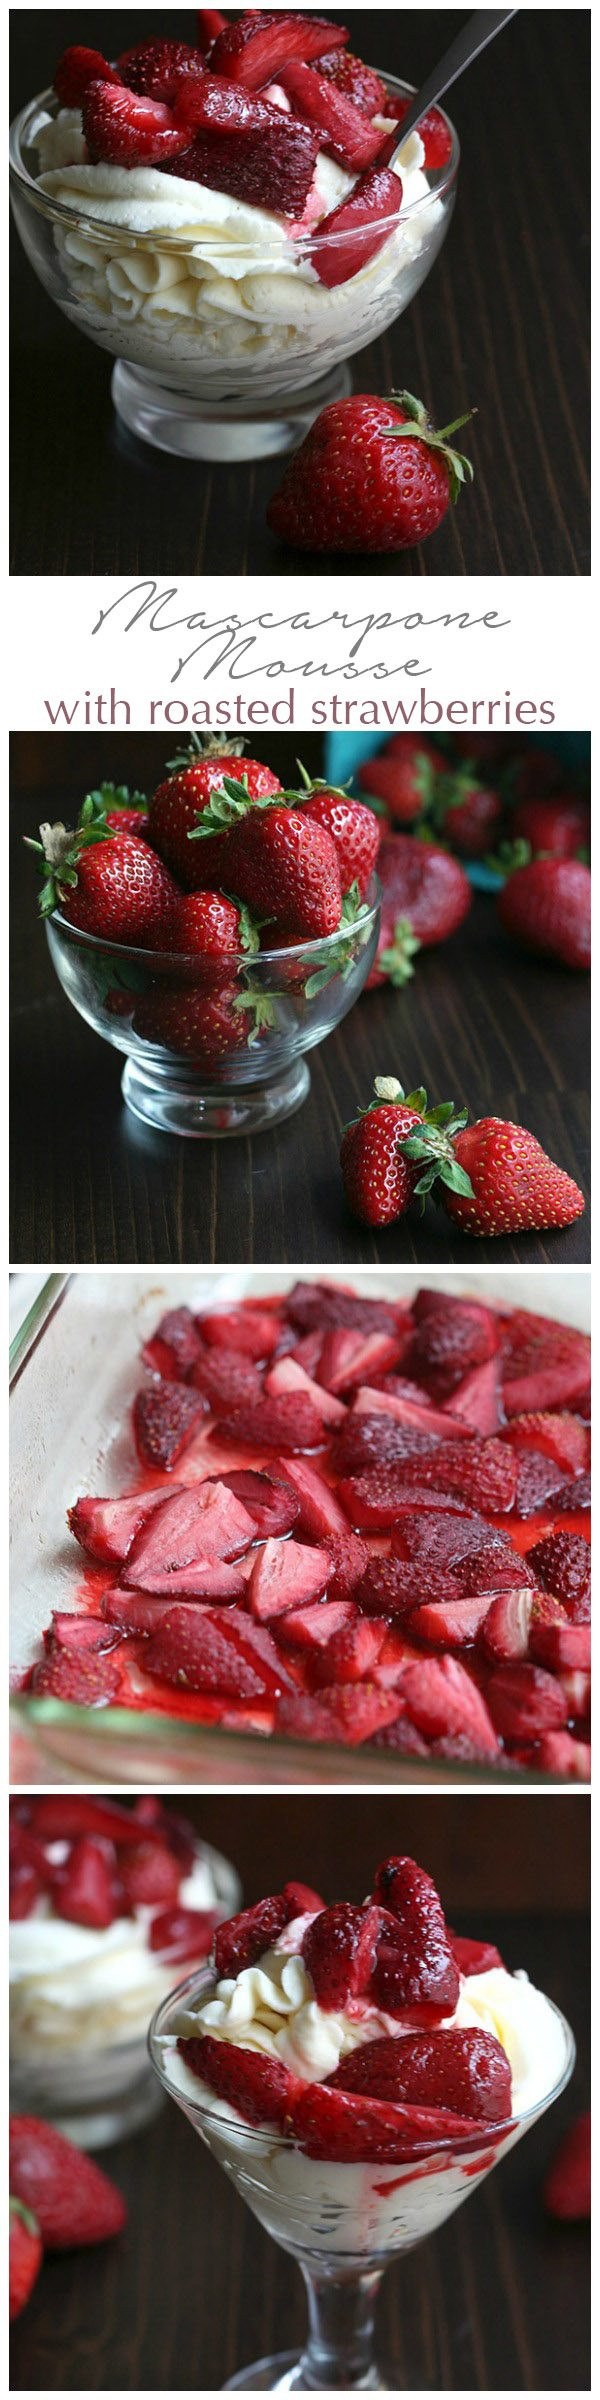 Mascarpone Dessert Recipes
 Low Carb Mascarpone Mousse with Roasted Strawberries